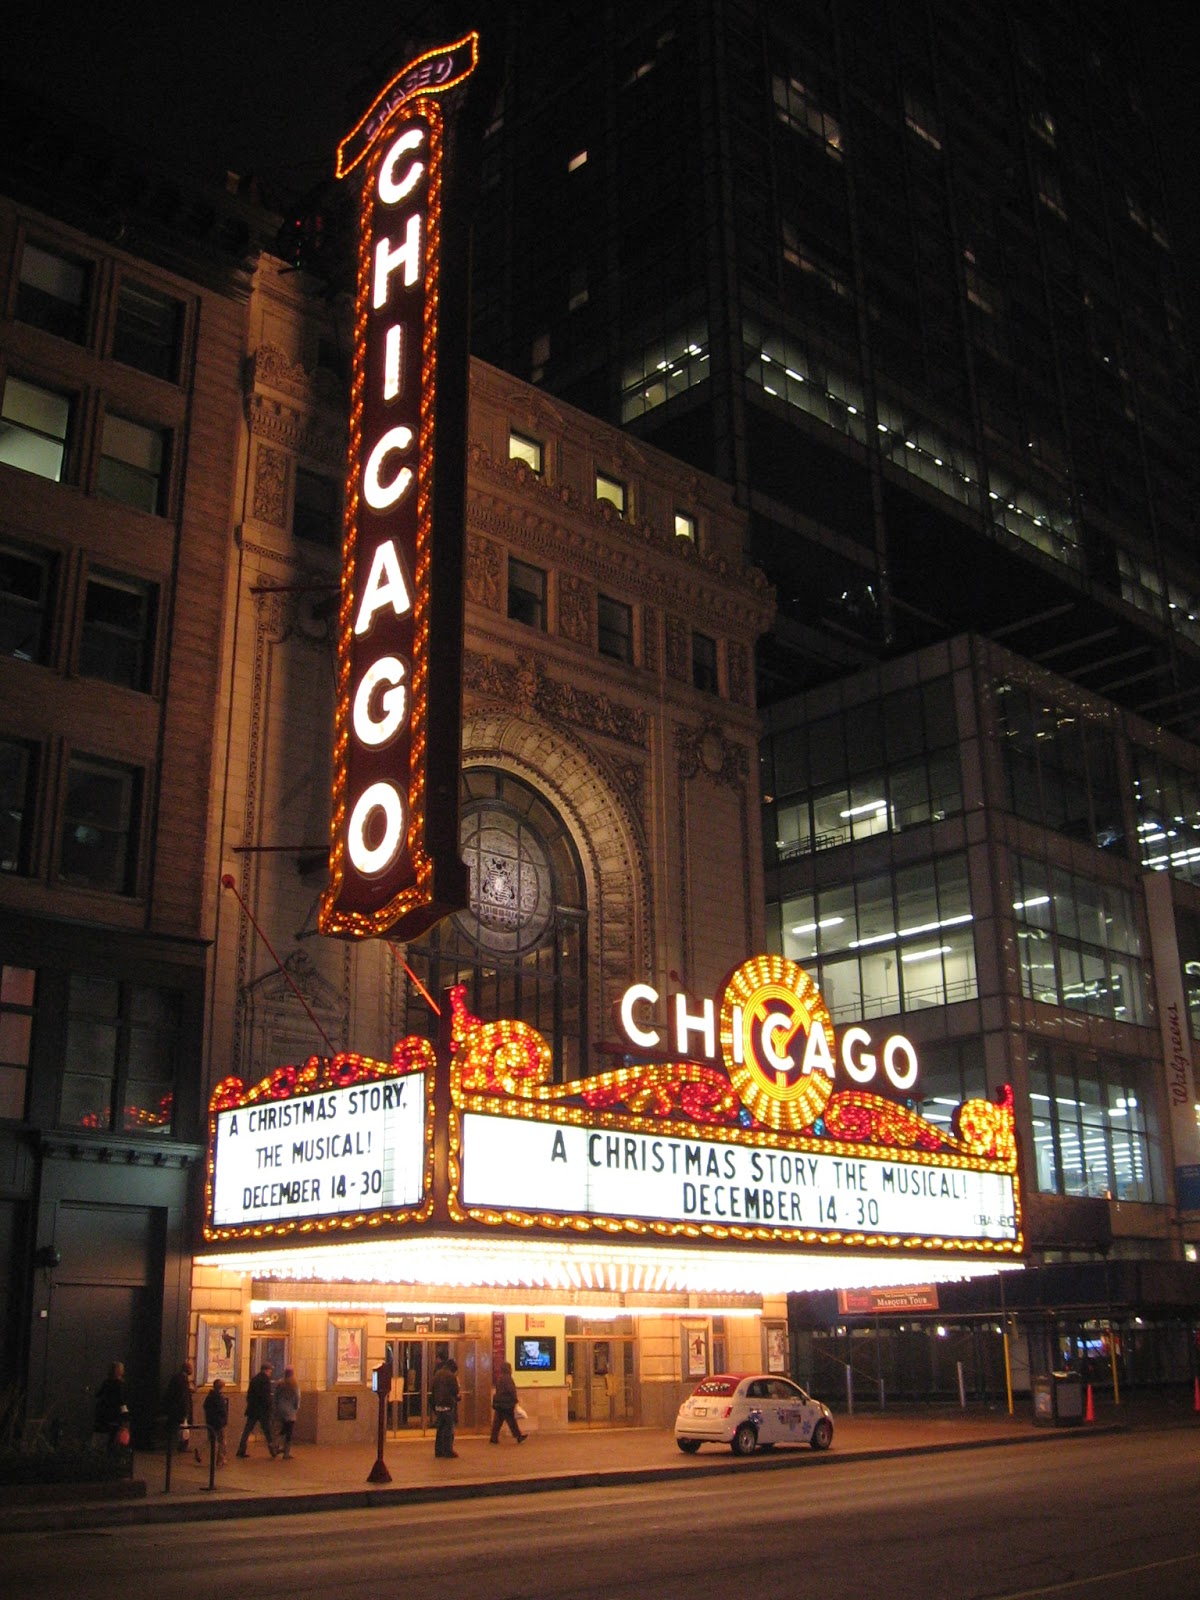 The Chicago Real Estate Local Photo Chicago Theatre all lit up for A